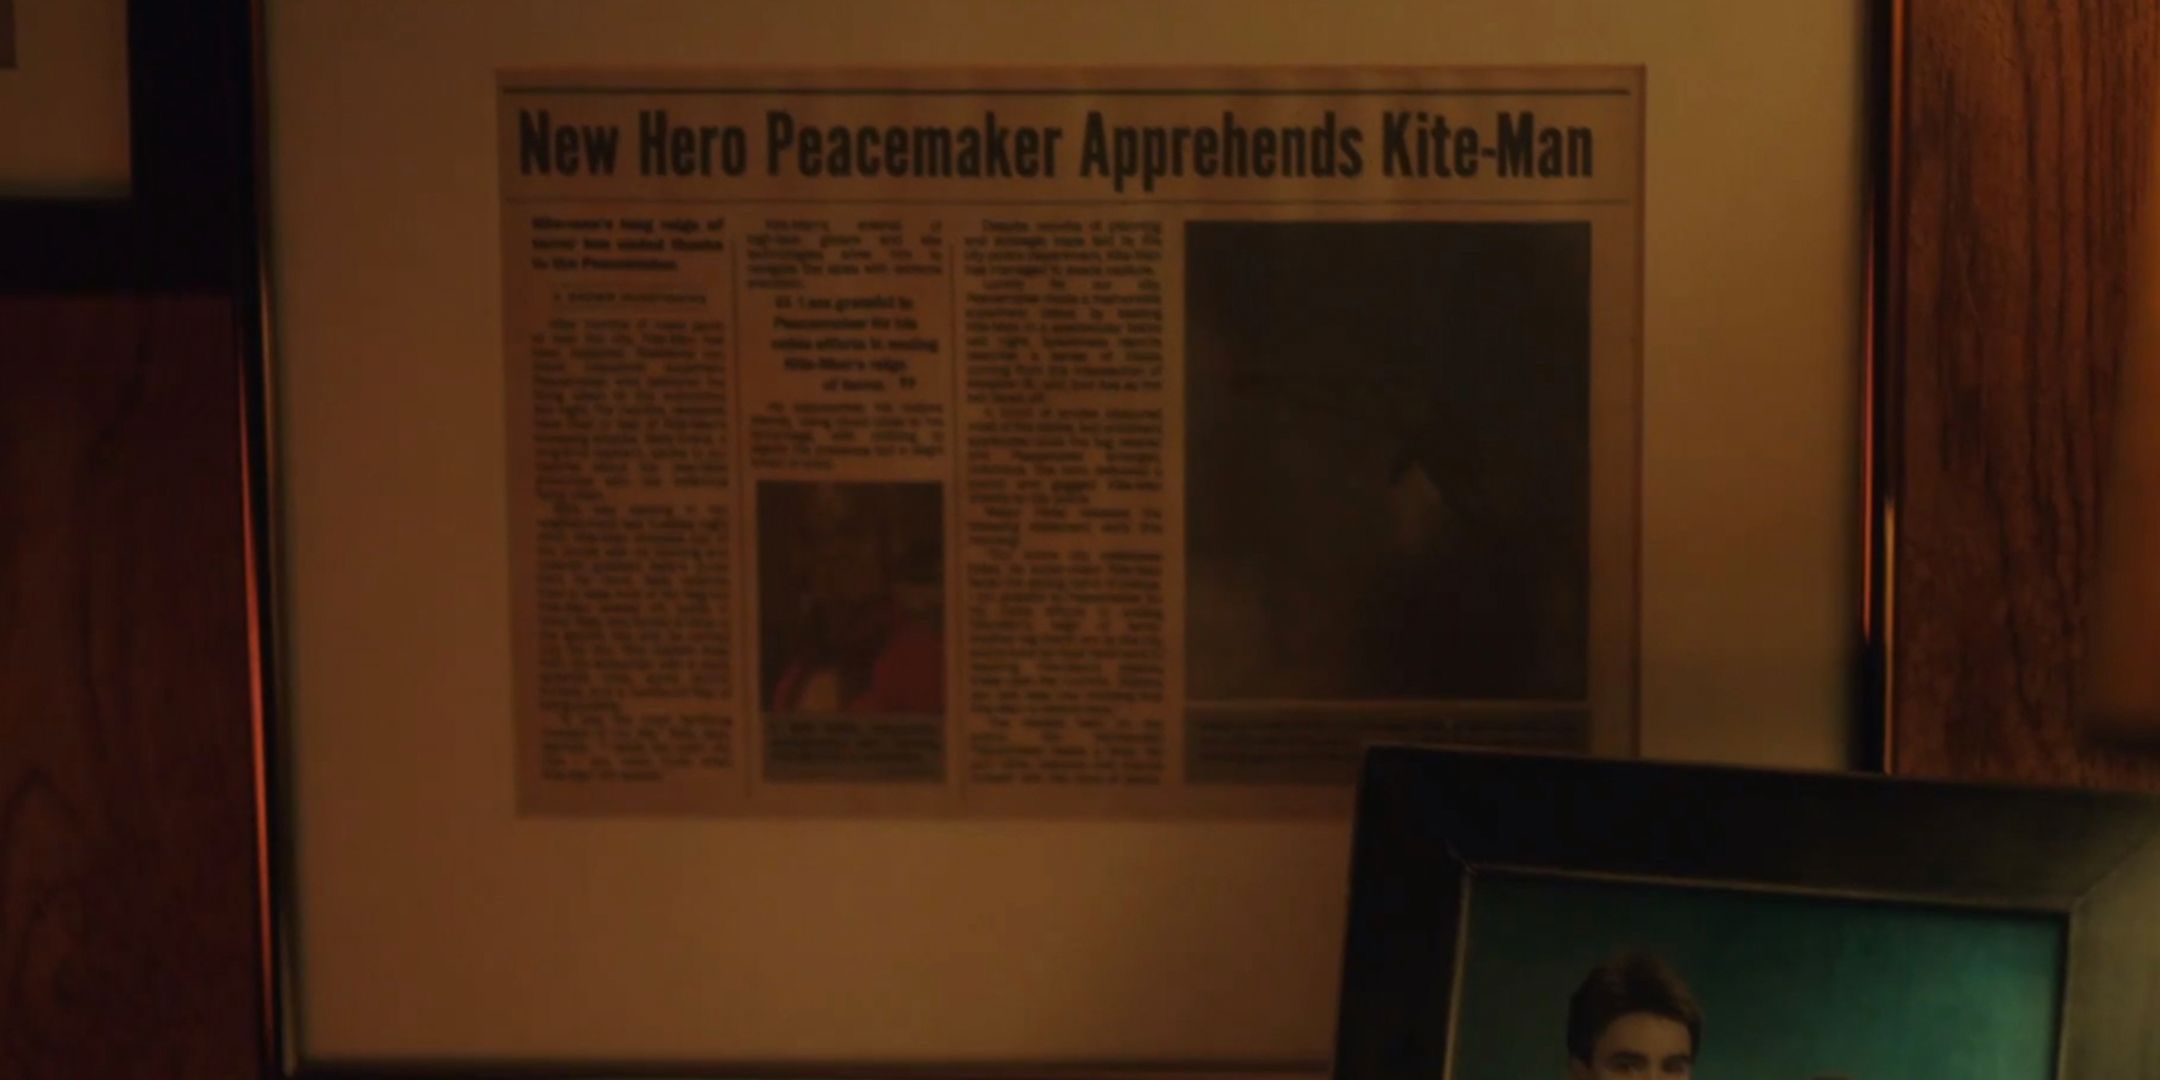 Kite Man is referenced on a news clipping in Peacemaker Episode 5